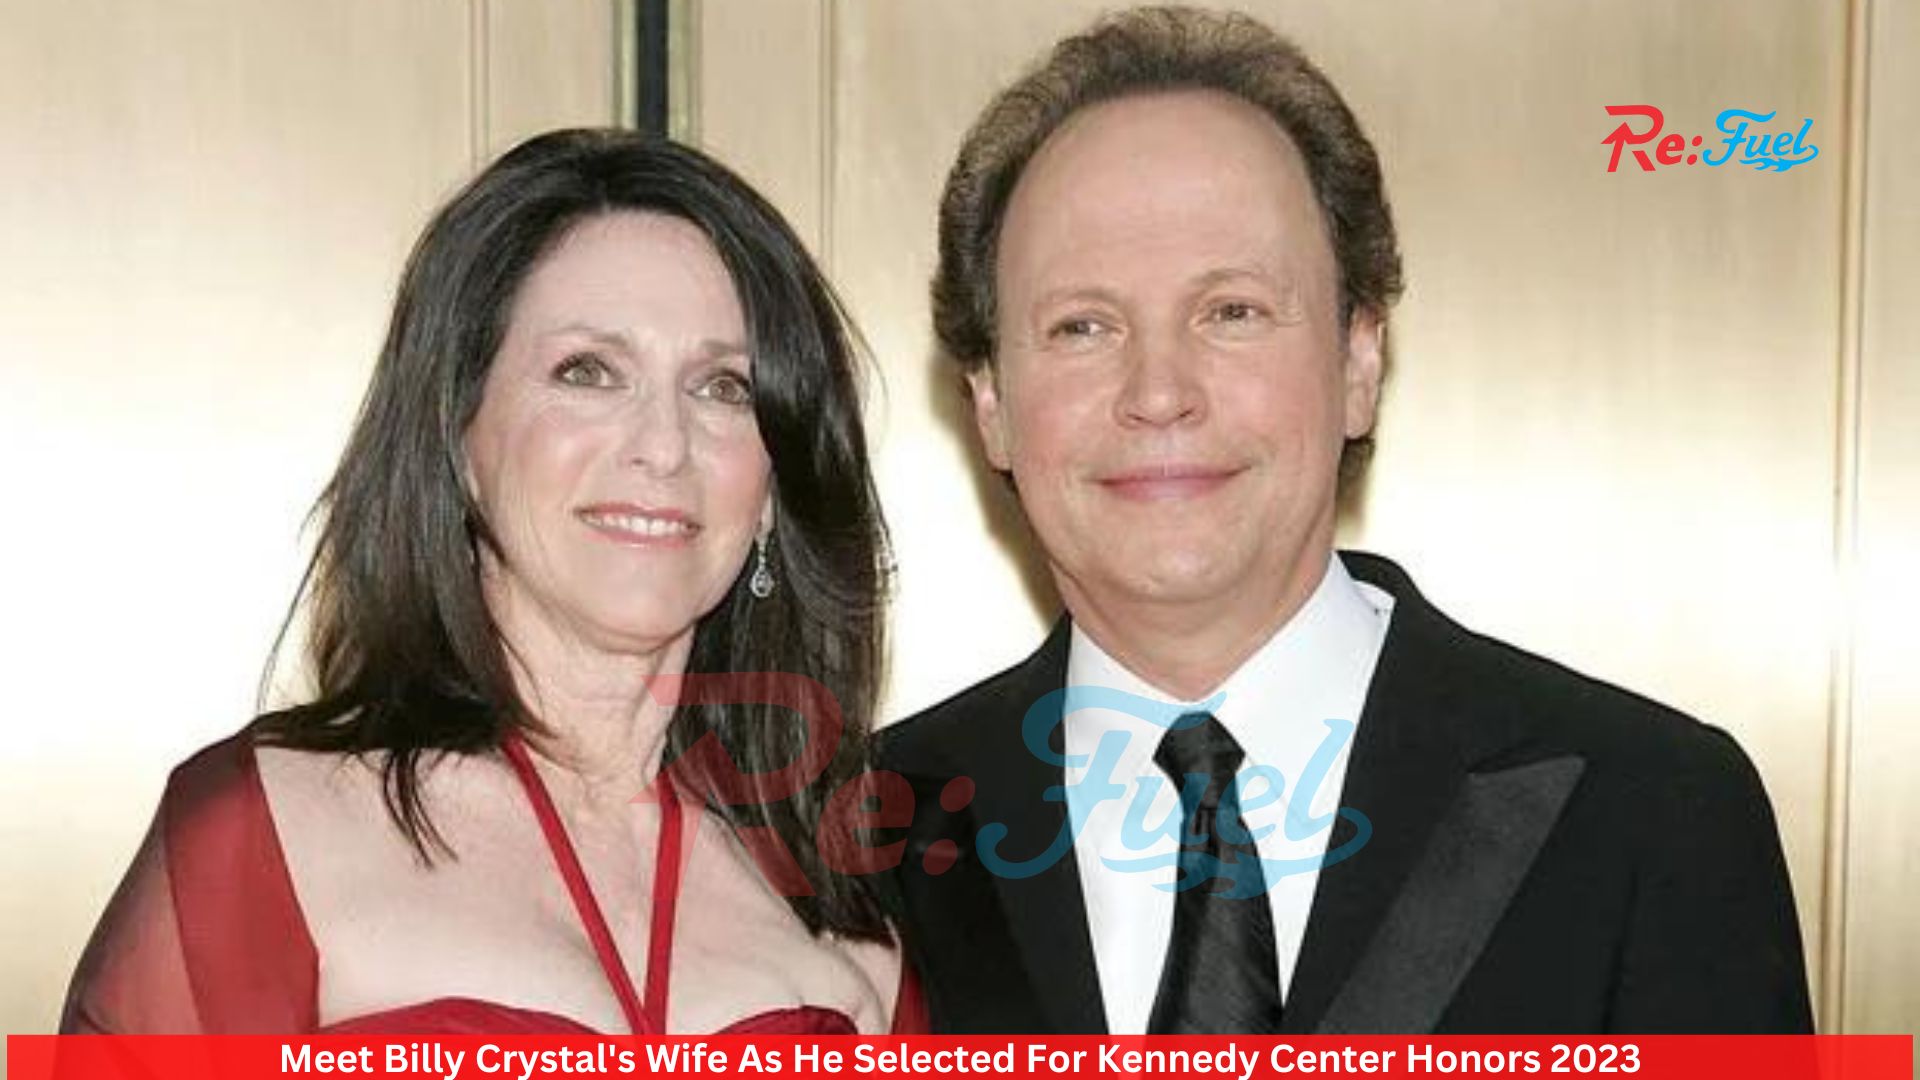 Meet Billy Crystal's Wife As He Selected For Kennedy Center Honors 2023